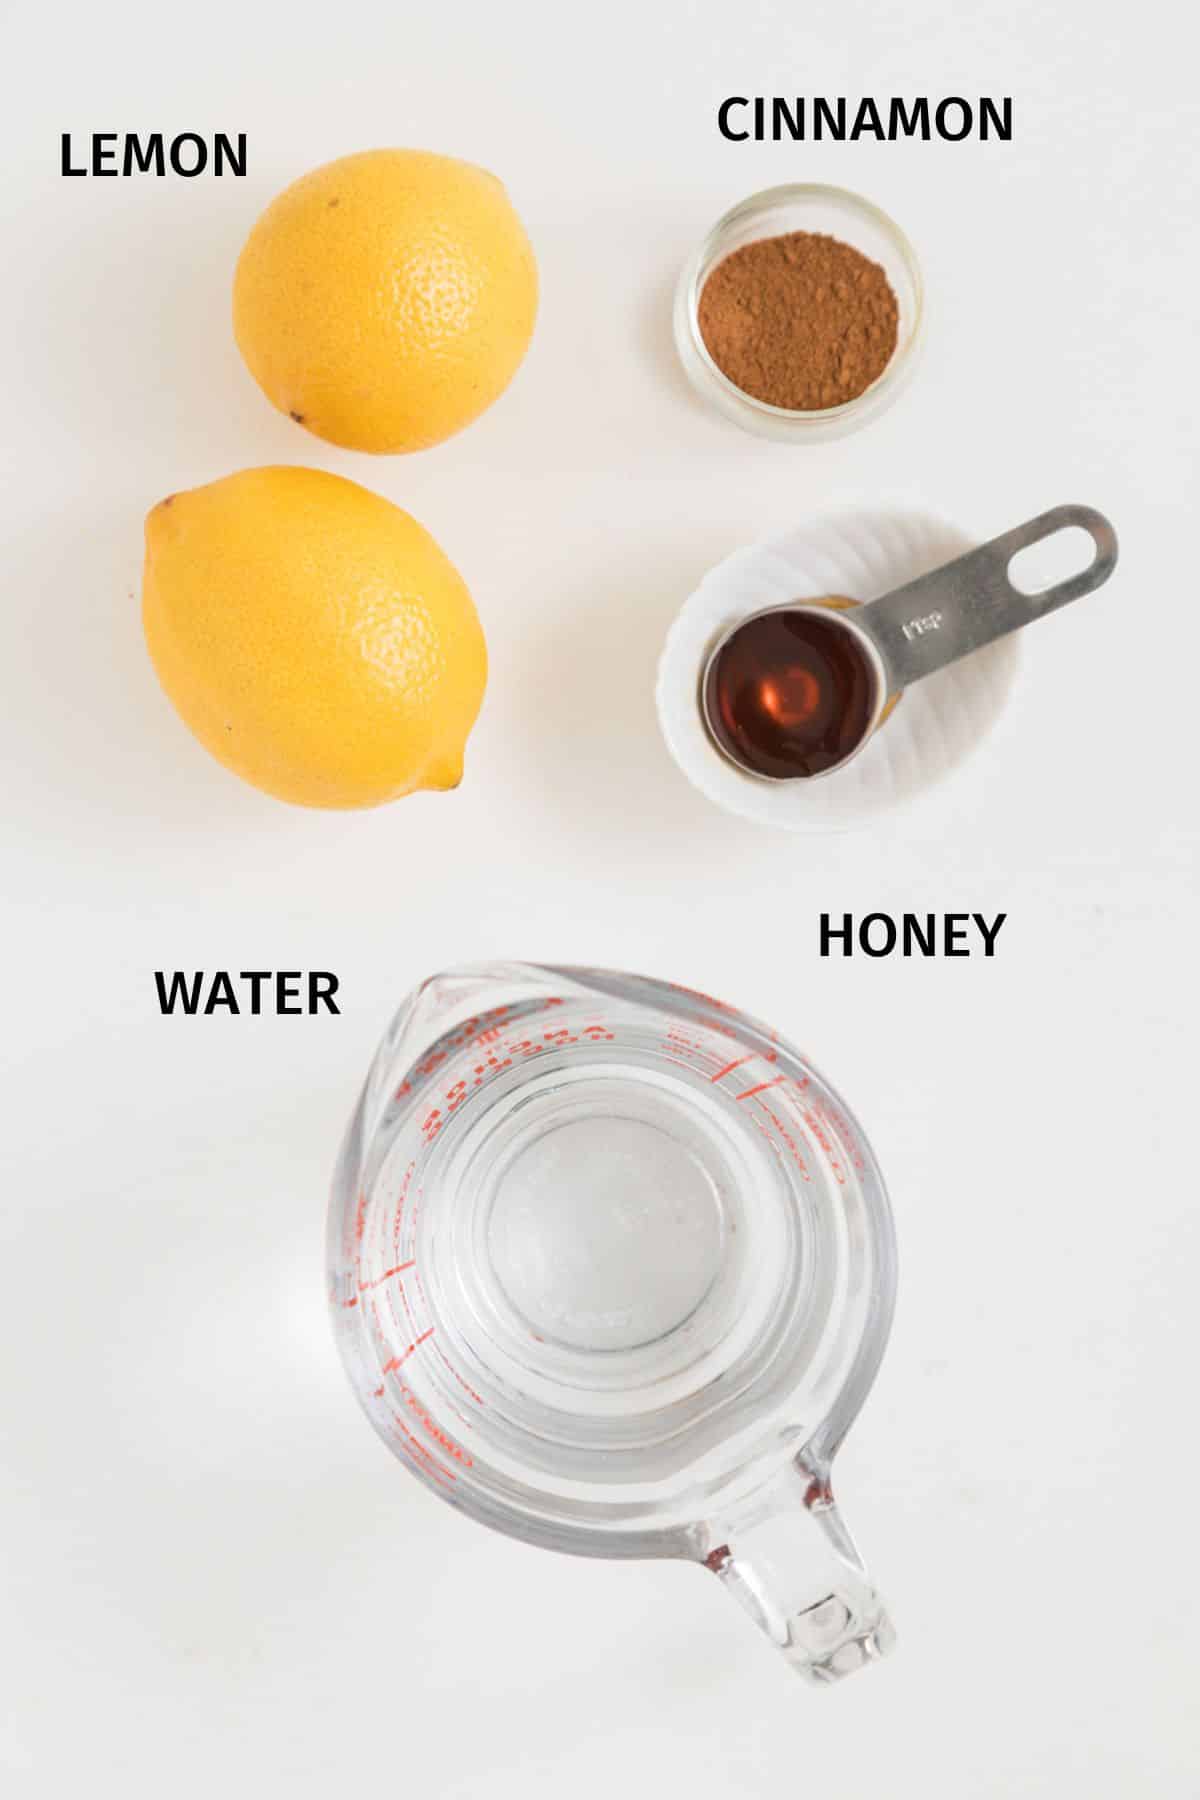 ingredients for lemon cinnamon water on table with labels.